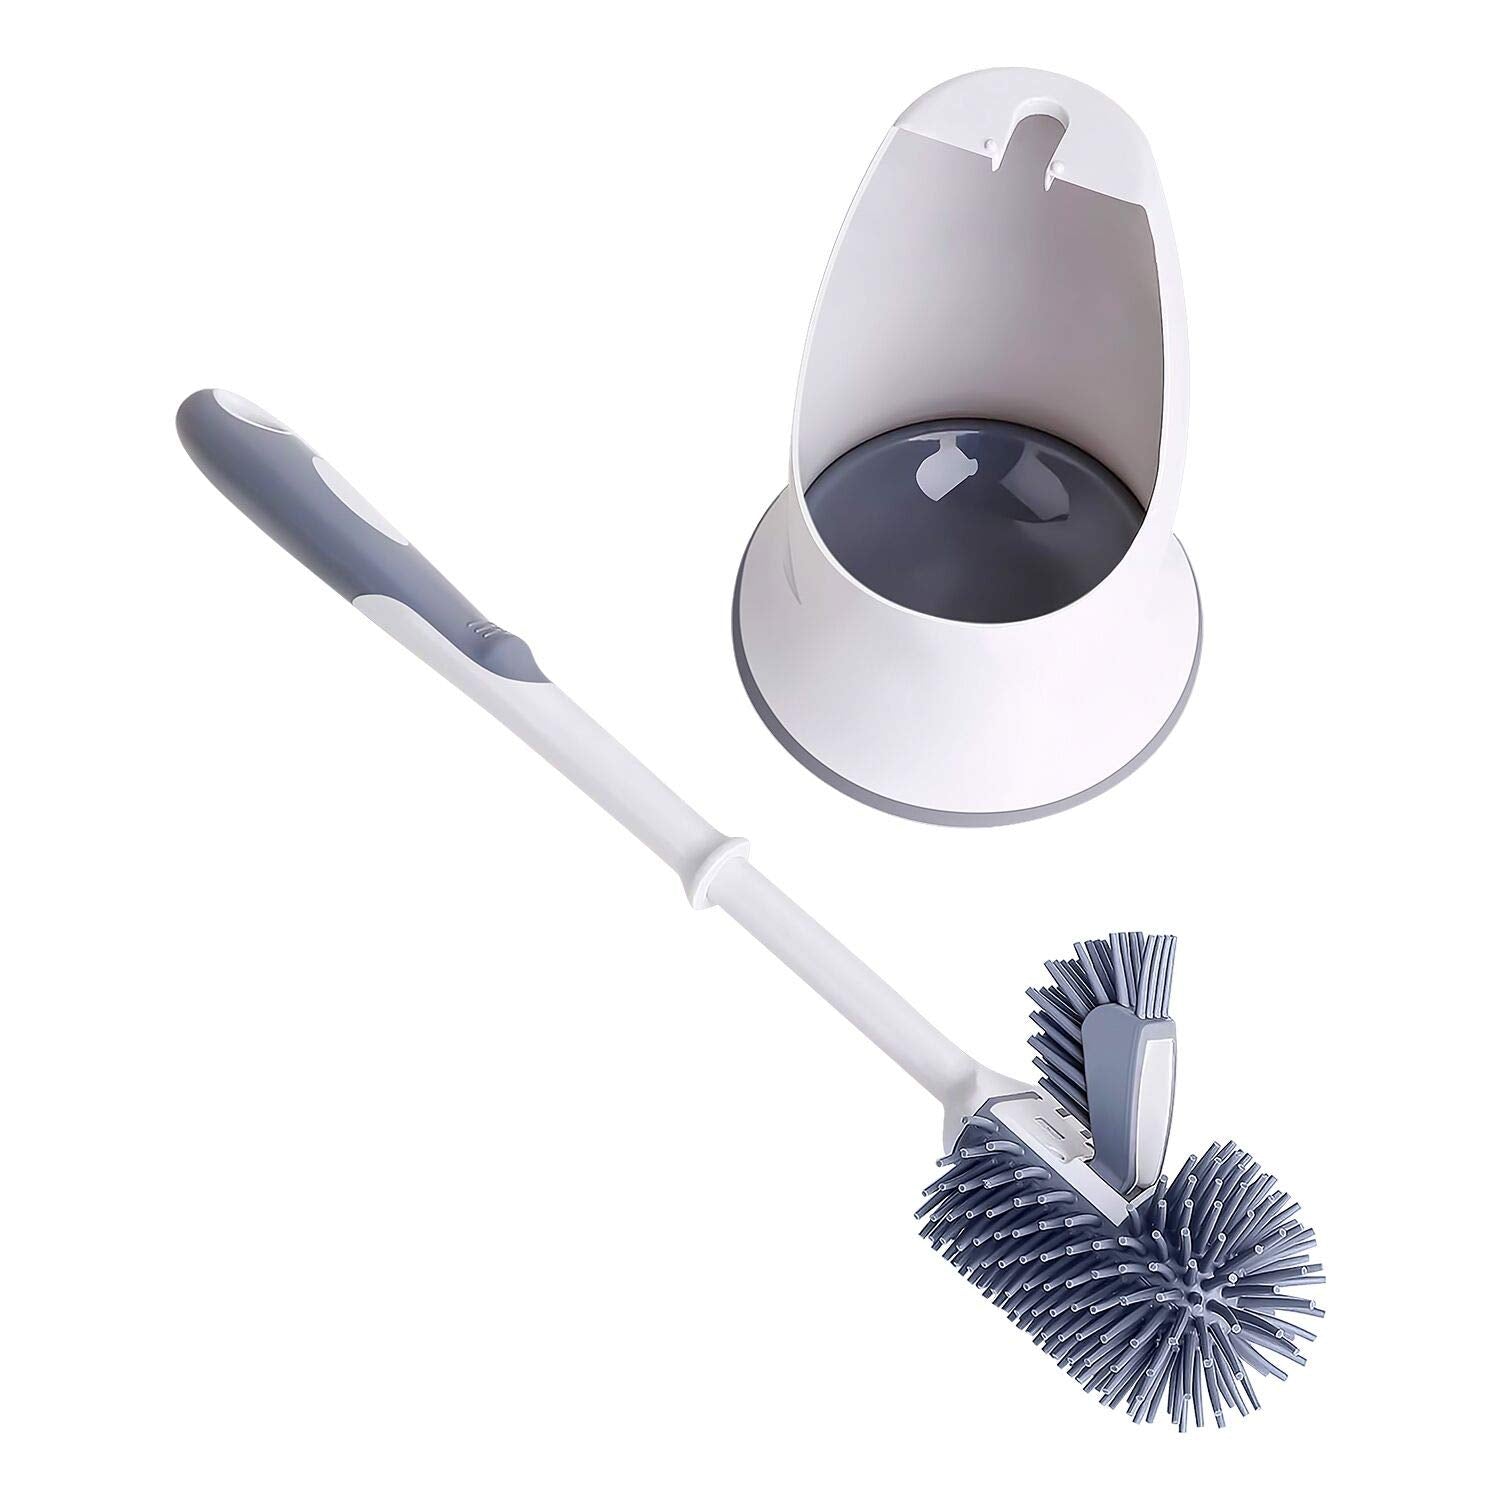 Compact Toilet Bowl Cleaner Brush and Holder w/ Silicone Bristles - Item  #5081